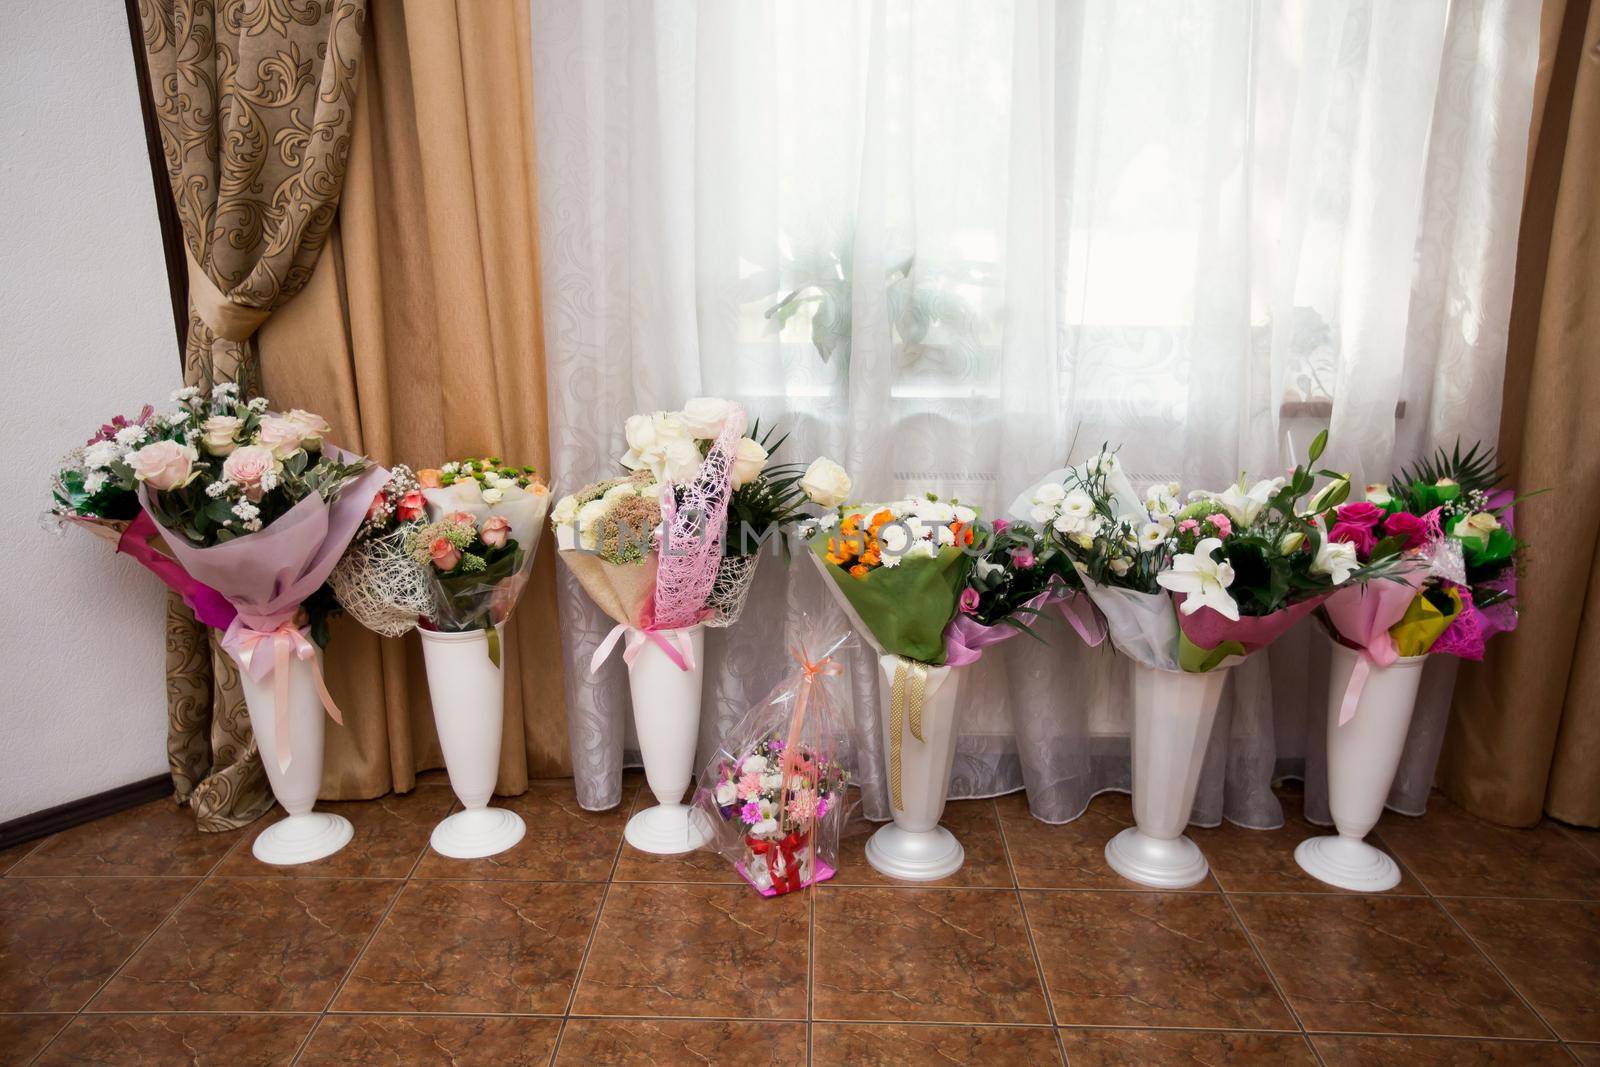 Gifts from bouquets of flowers in vases at the wedding. by StudioPeace